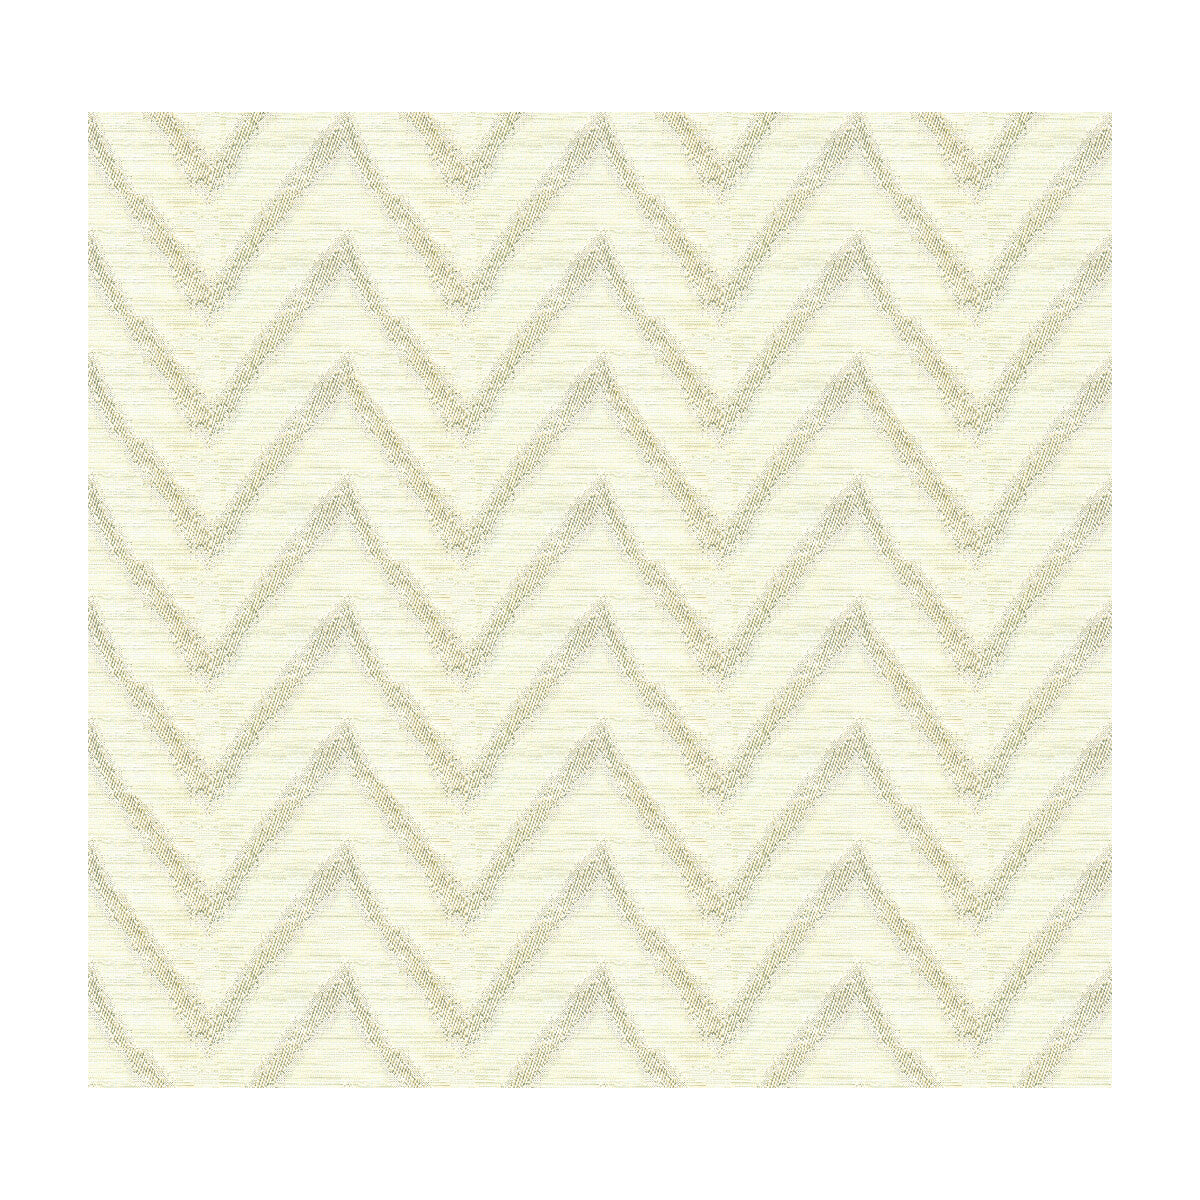 Ruzen fabric in cream color - pattern 4071.1.0 - by Kravet Design in the Constantinople collection